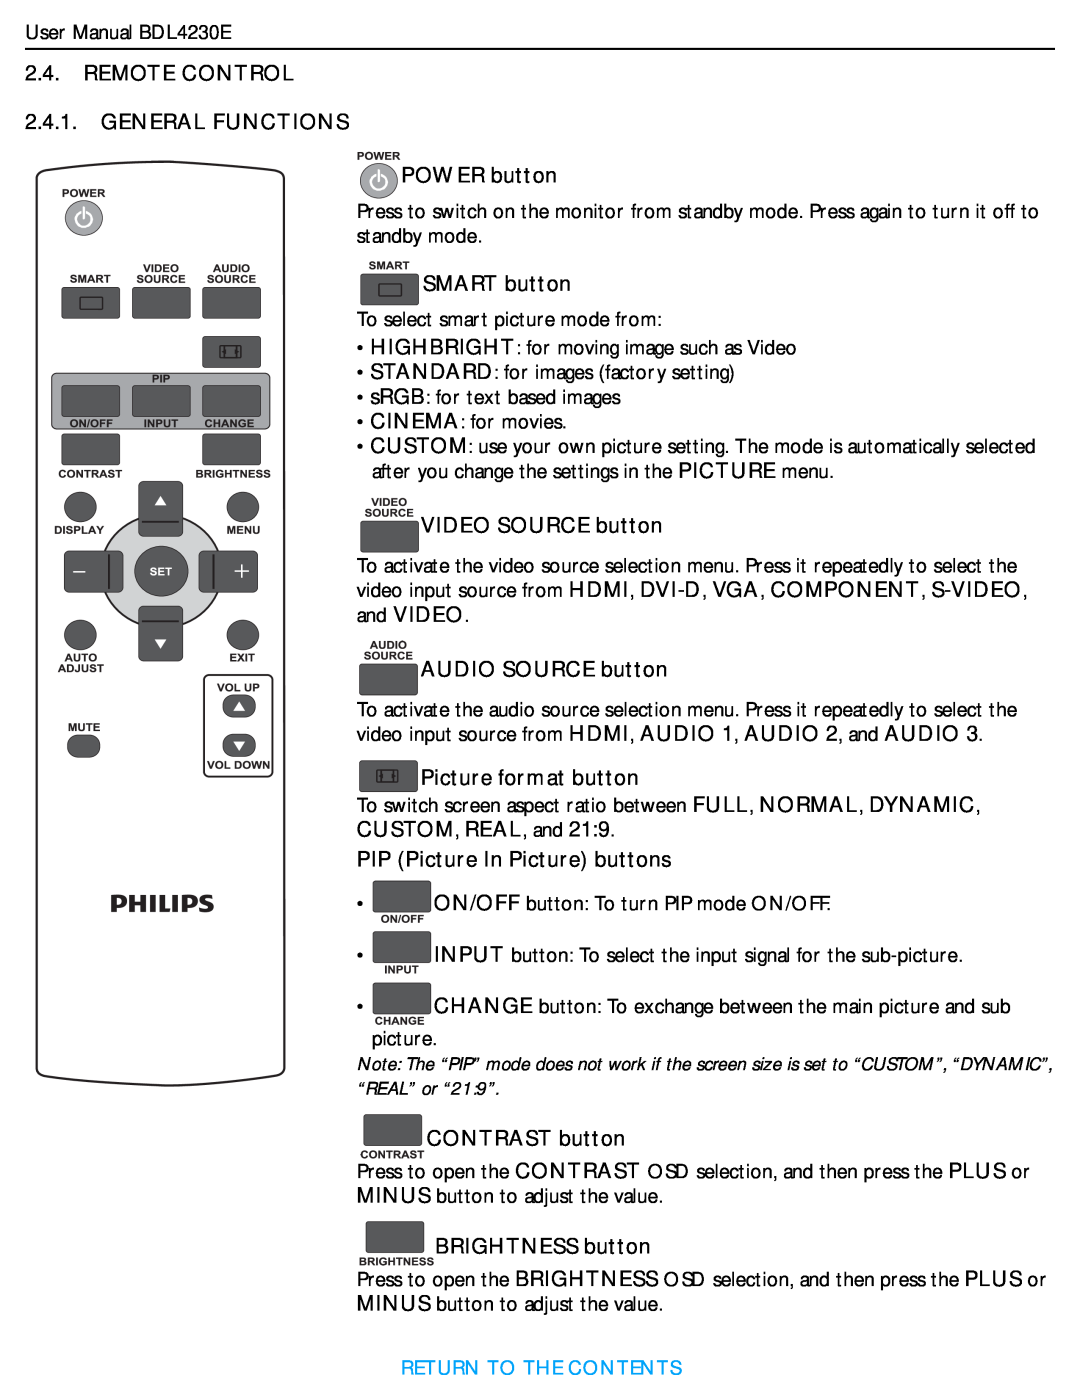 Philips BDL4230E REMOTE CONTROL 2.4.1. GENERAL FUNCTIONS POWER button, SMART button, VIDEO SOURCE button, CONTRAST button 